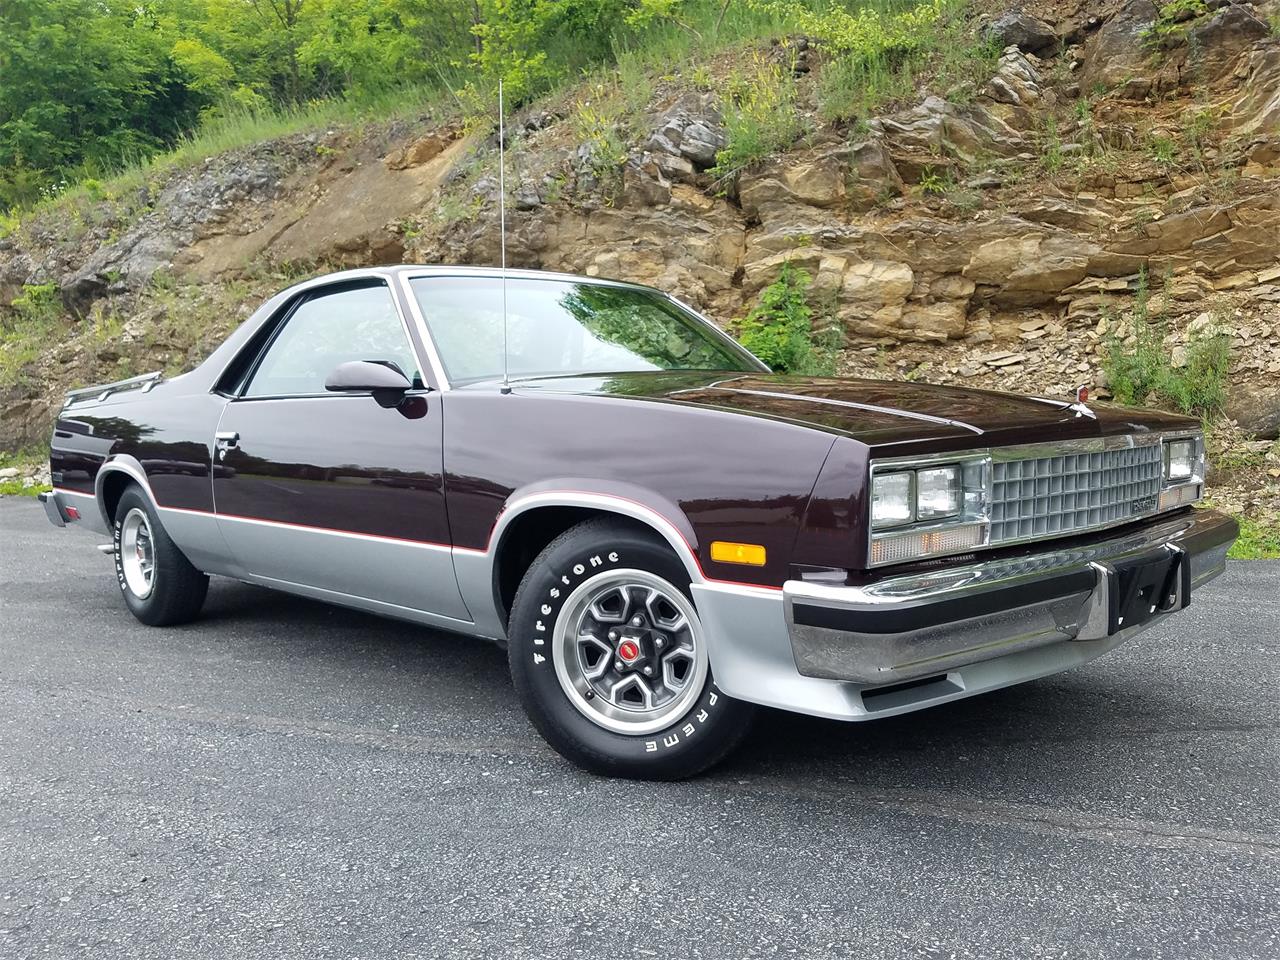 1987 El Camino For Sale - www.inf-inet.com